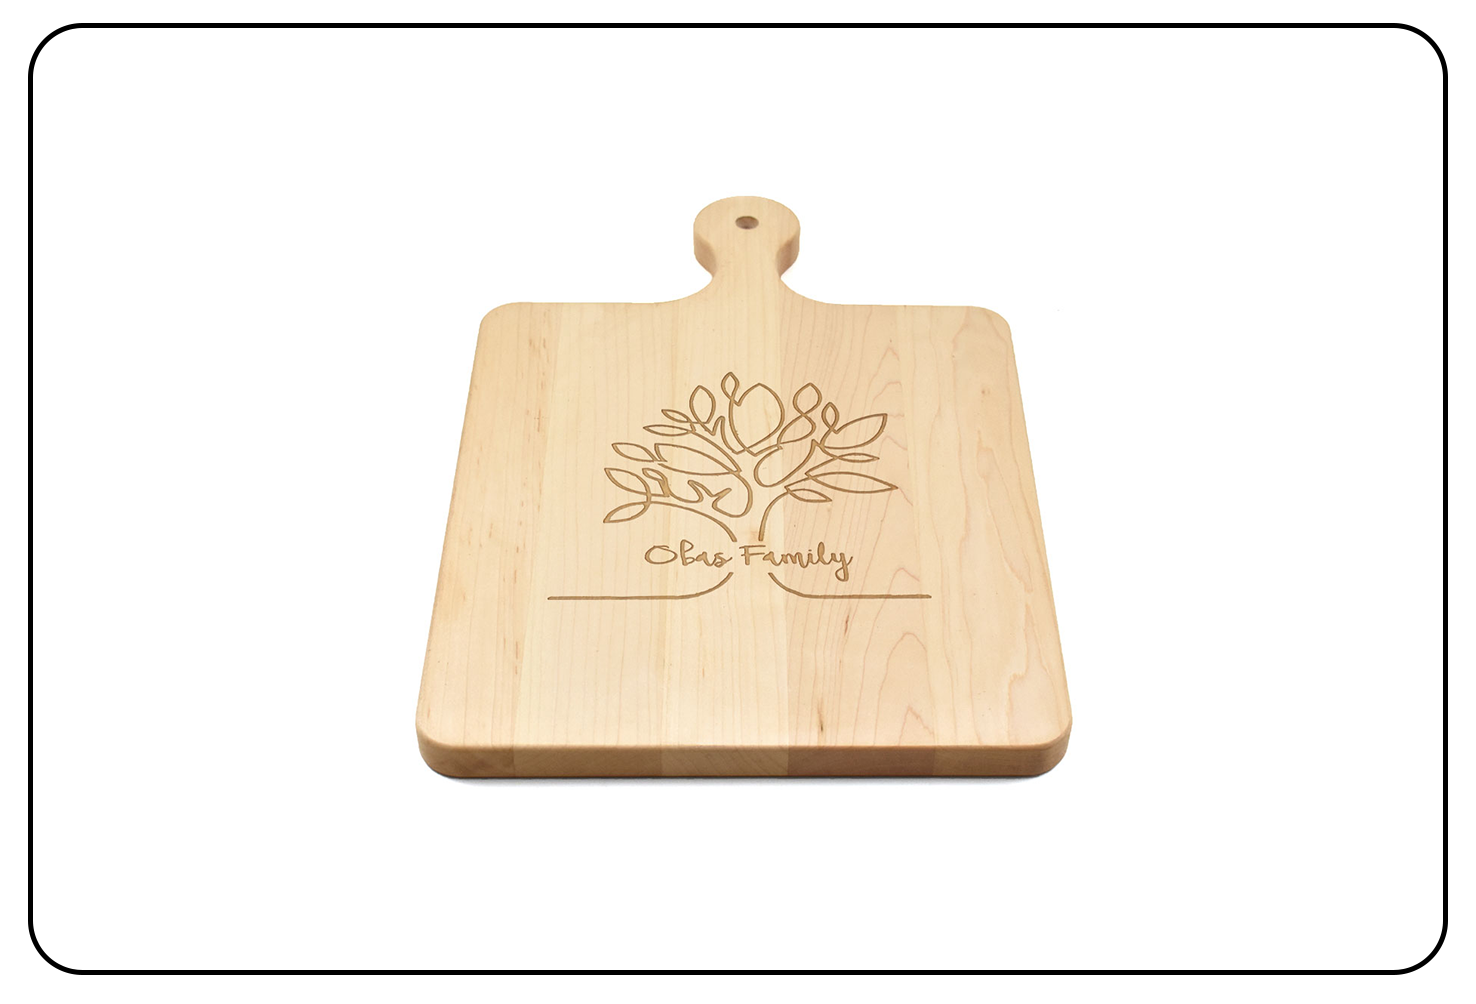 Artistic chopping board engraving for personalized culinary style.